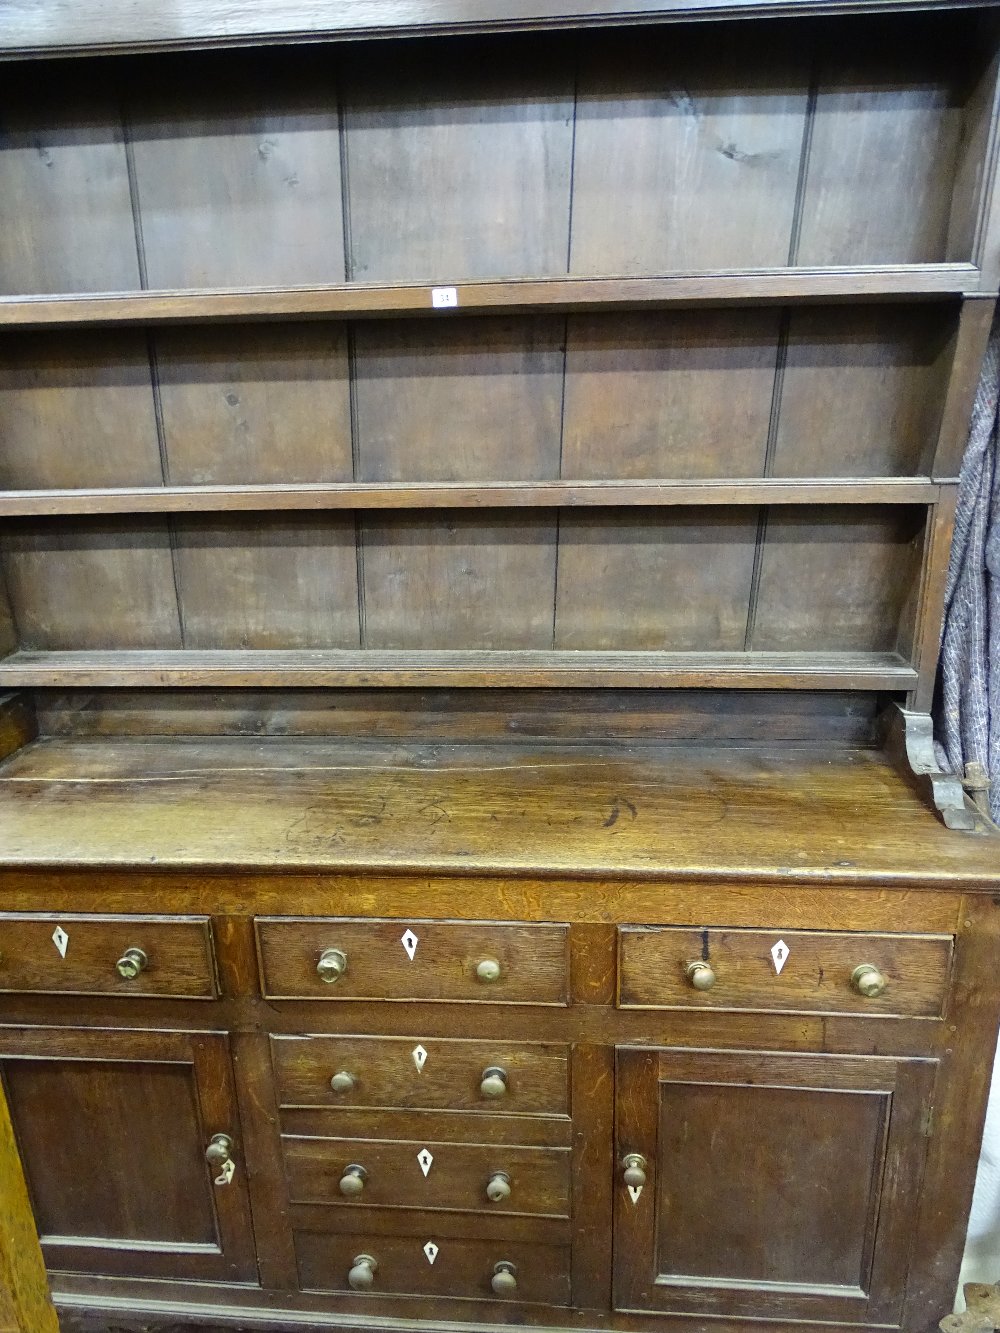 Circa 19th Century Welsh dresser with 'T' arrangement of three opening drawers and three blind